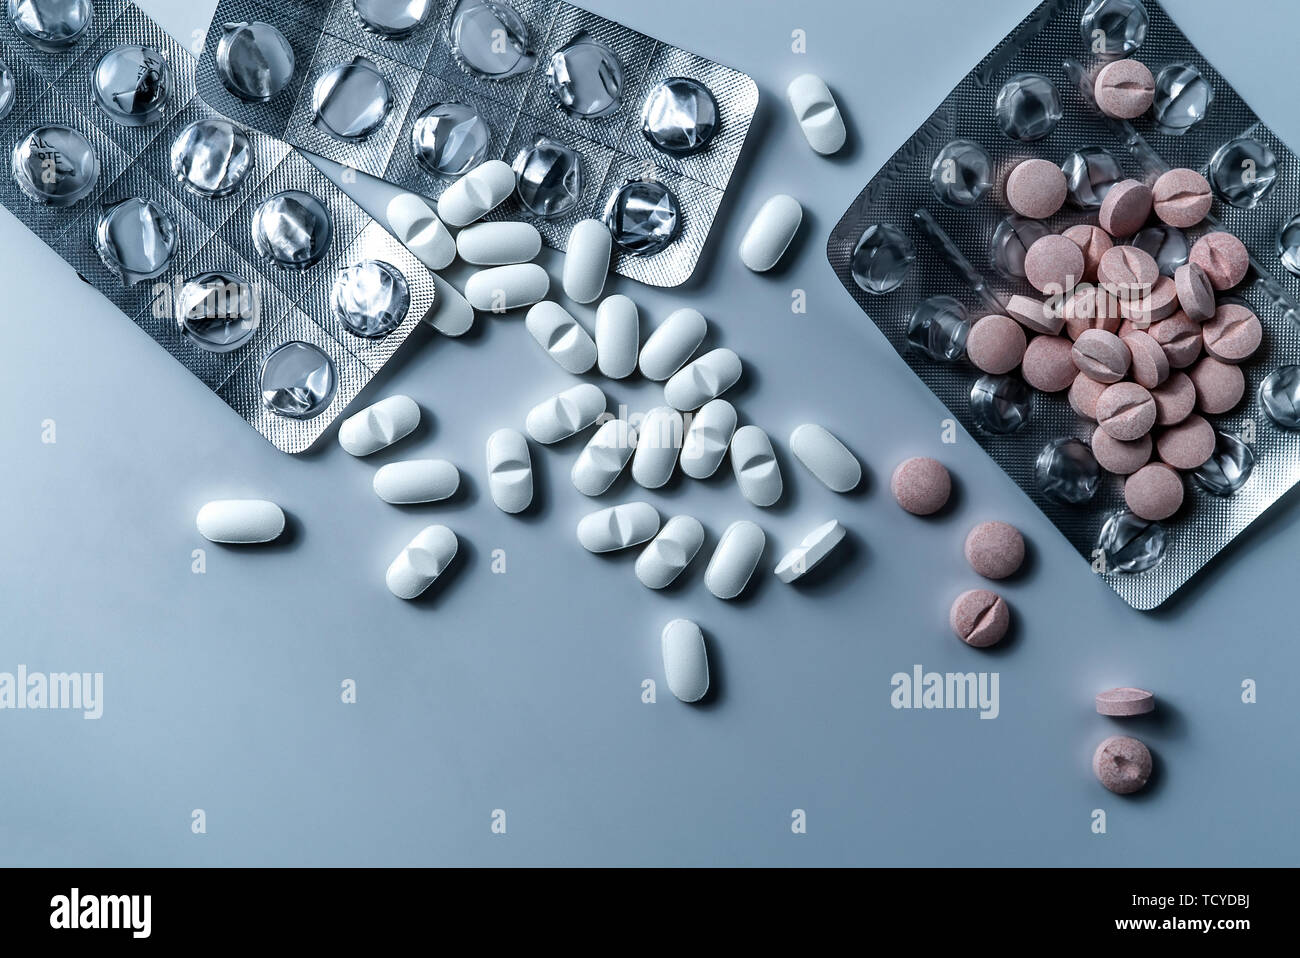 Top view of many prescription drugs, medicine tablets or vitamin pills in a pile and empty blister packs - Concept of healthcare, opioids addiction Stock Photo